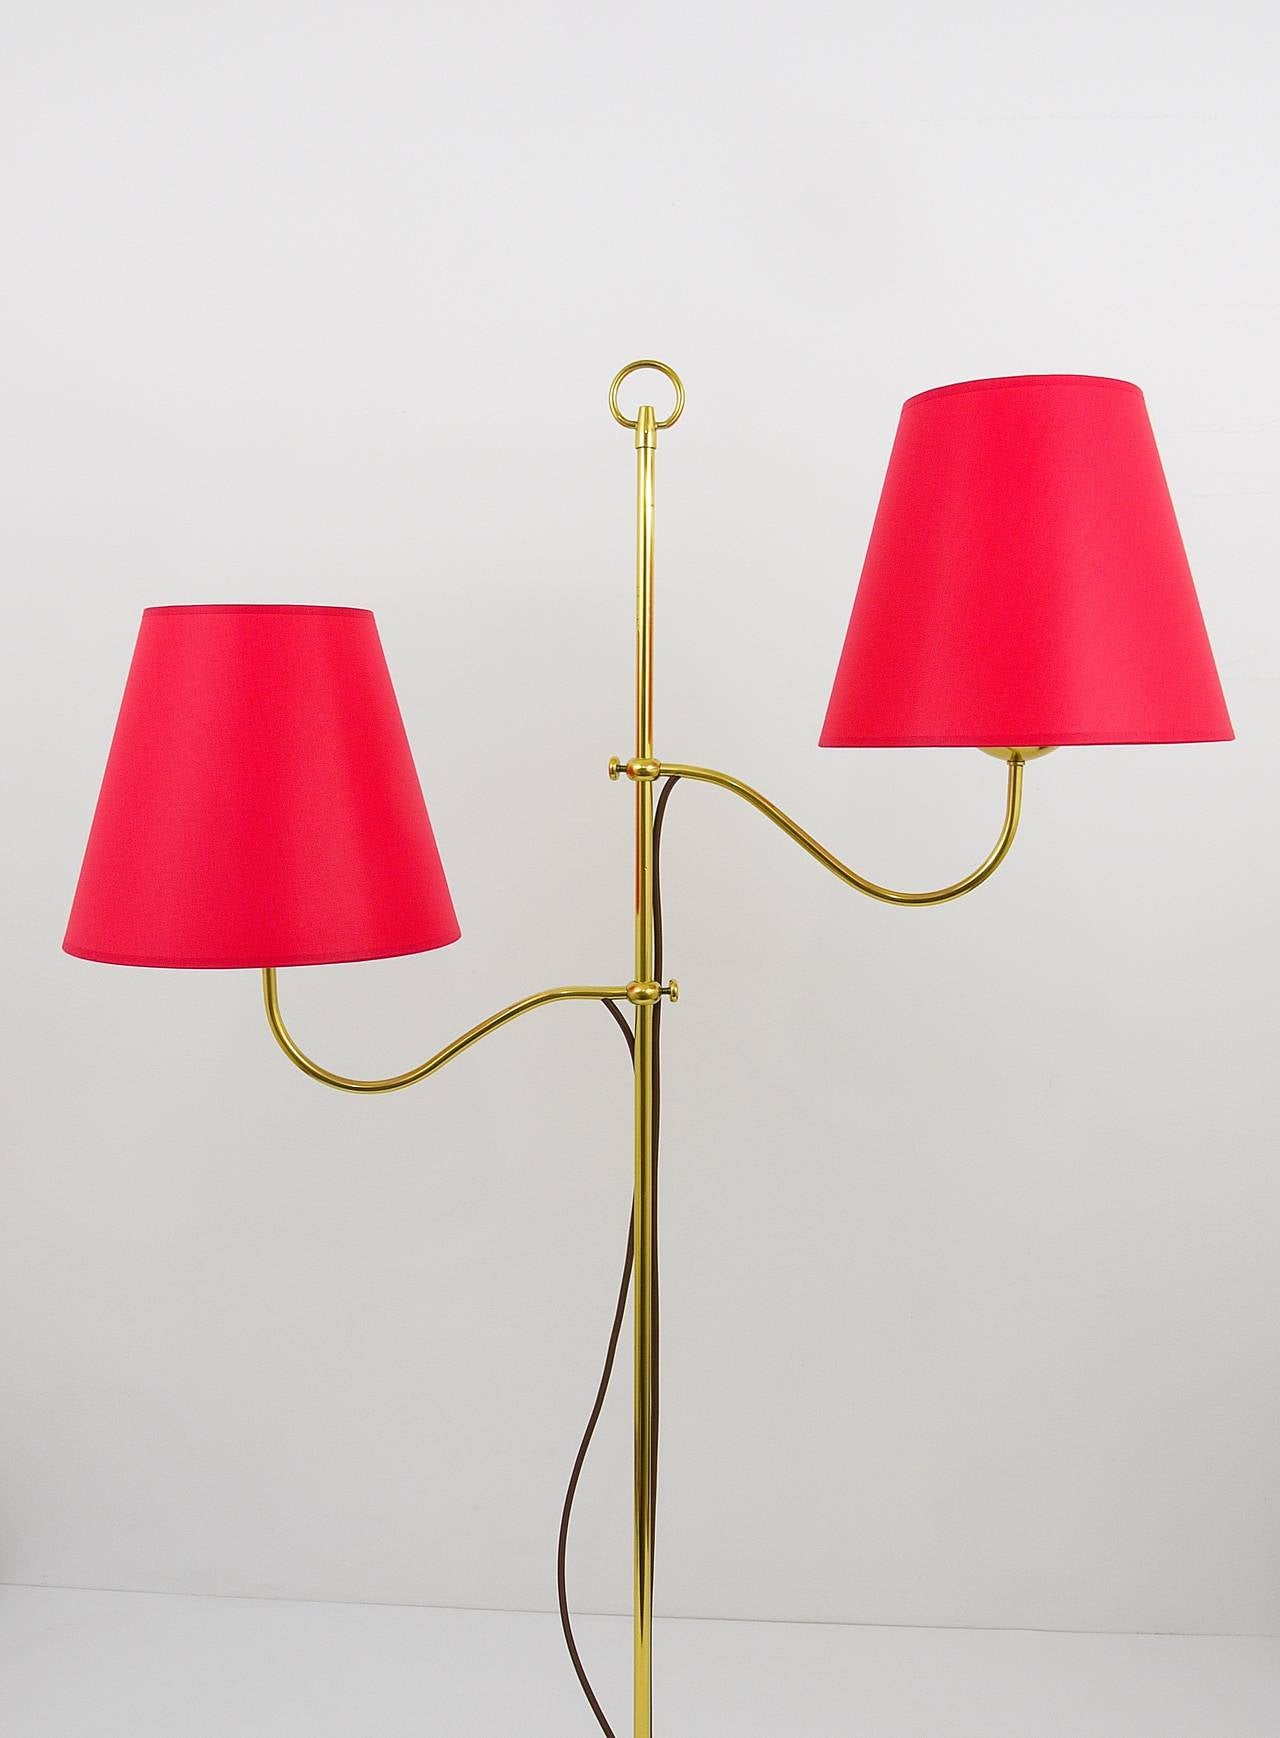 Elegant Two-Arms Mid-Century Brass Floor Lamp by Josef Frank, Austria, 1950 For Sale 1